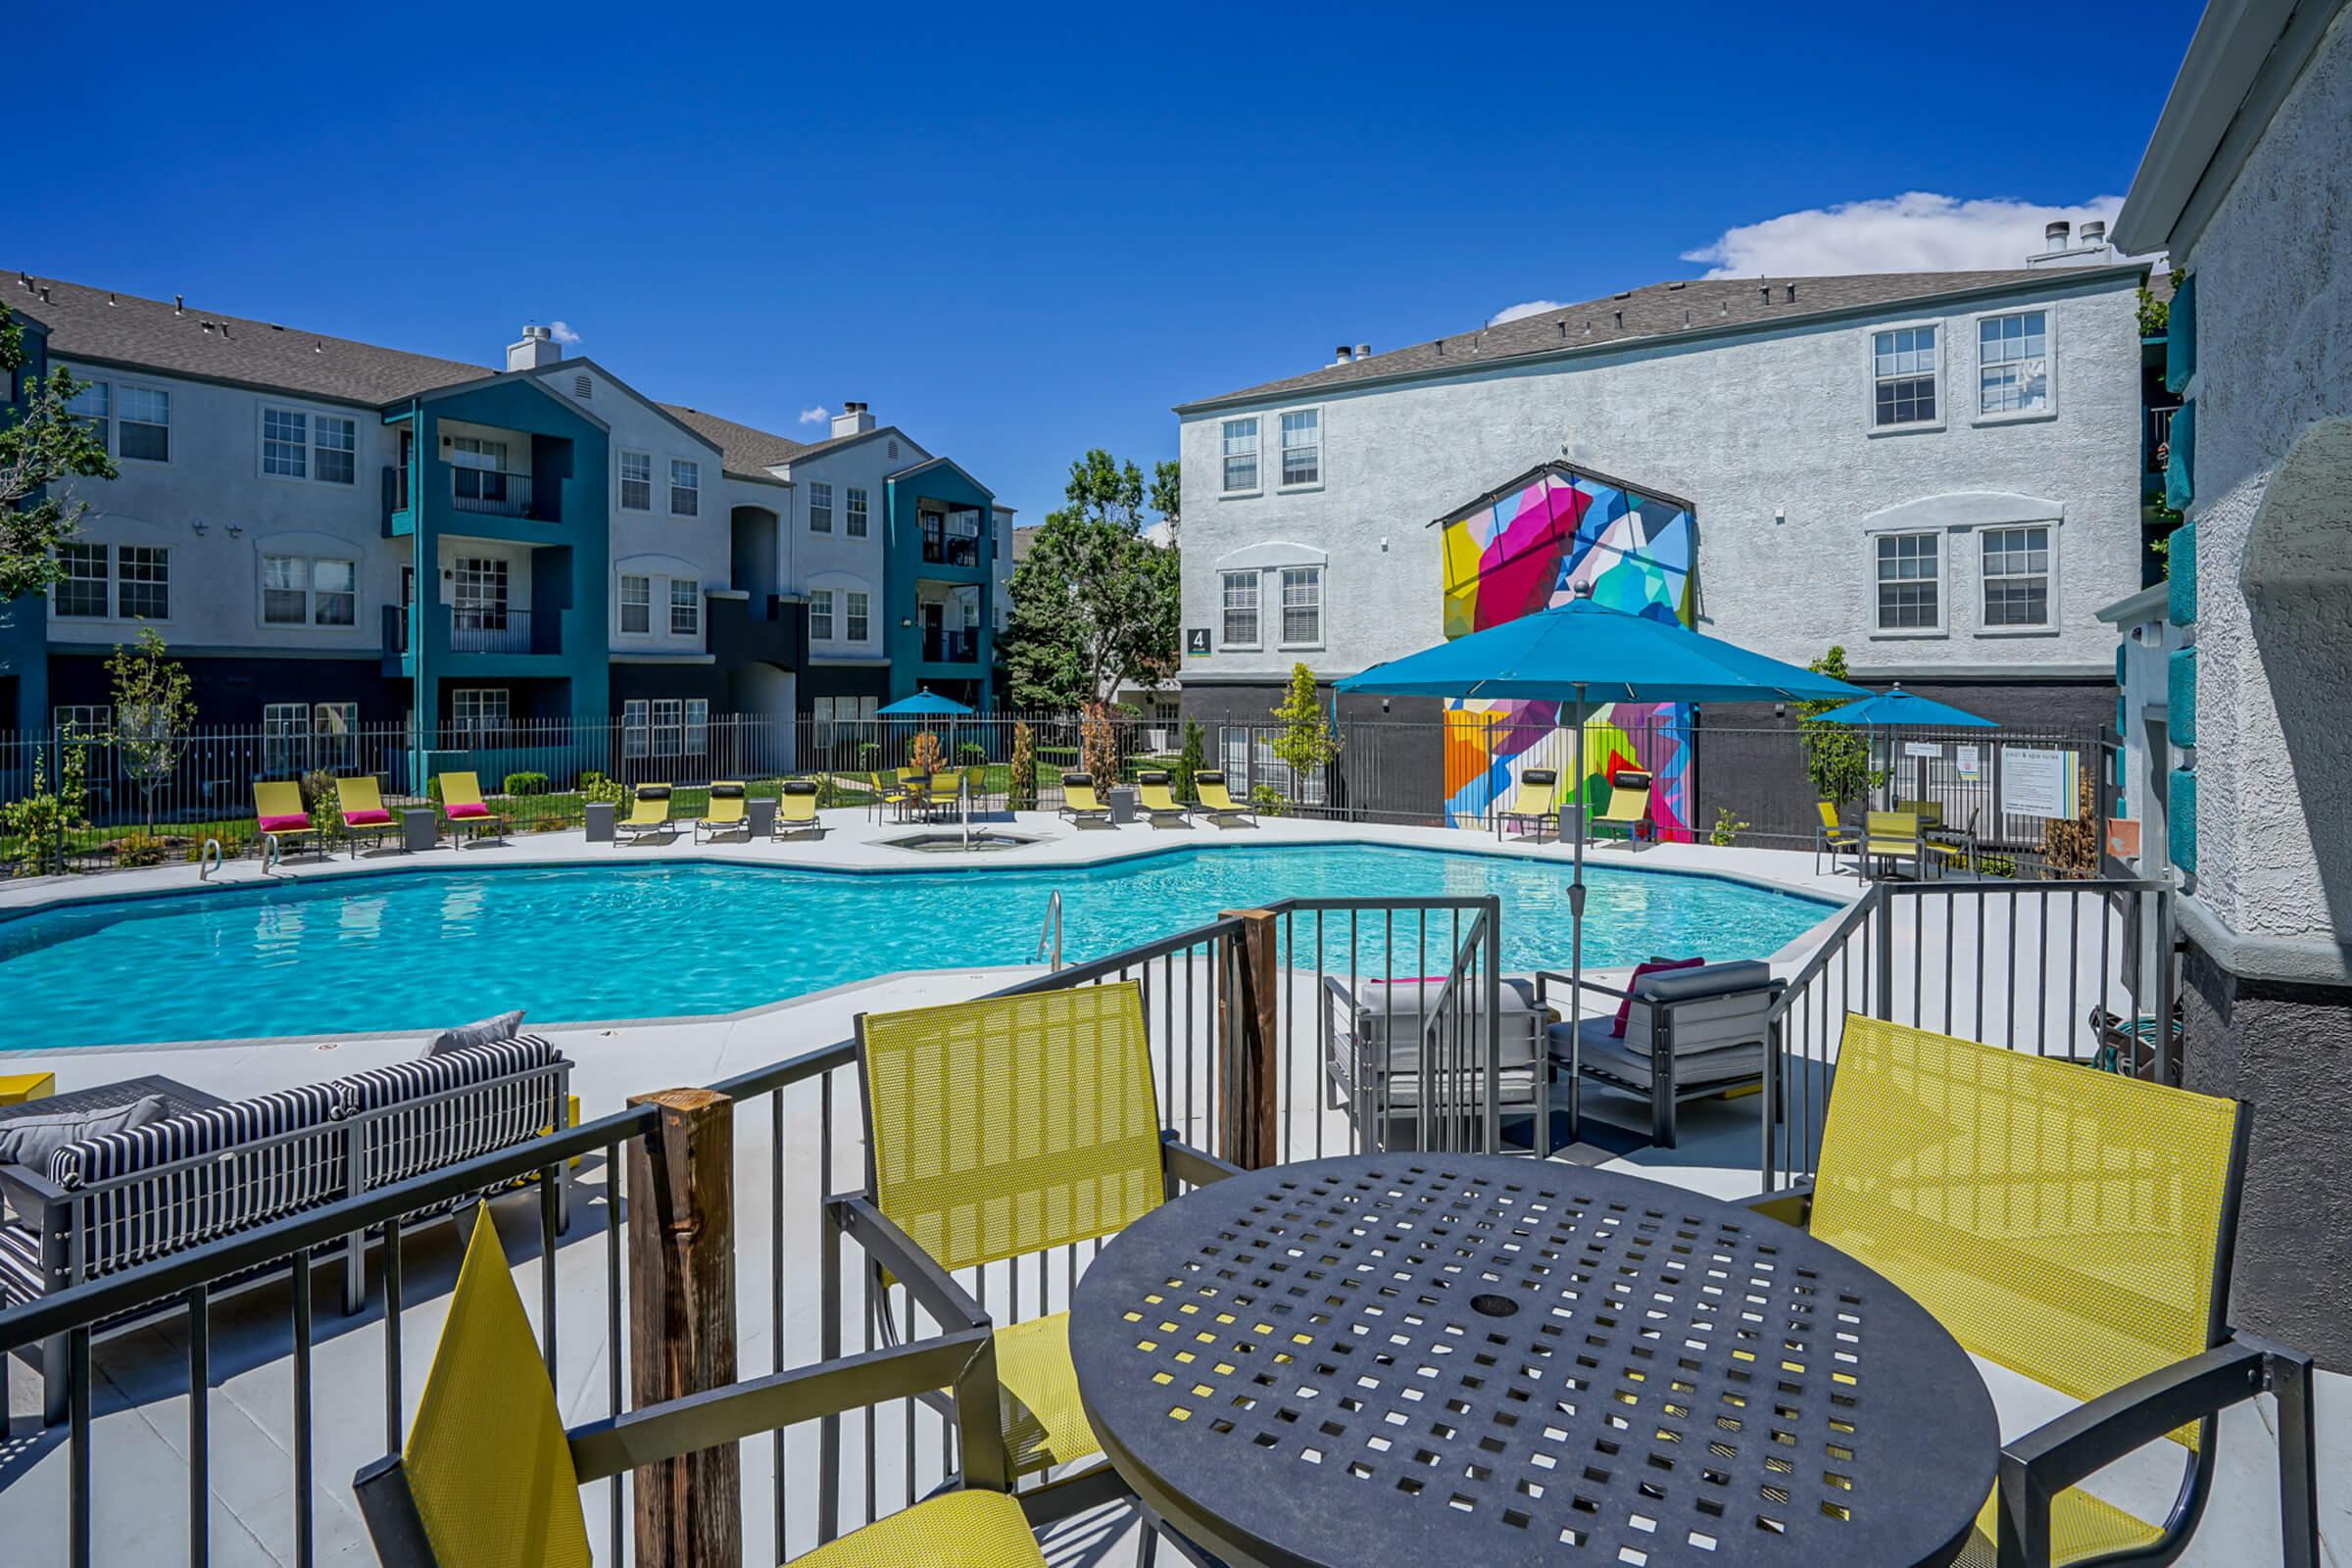 Poolside Lounge with Resort-style Furniture  - Prisma Apartments - Albuquerque - New Mexico